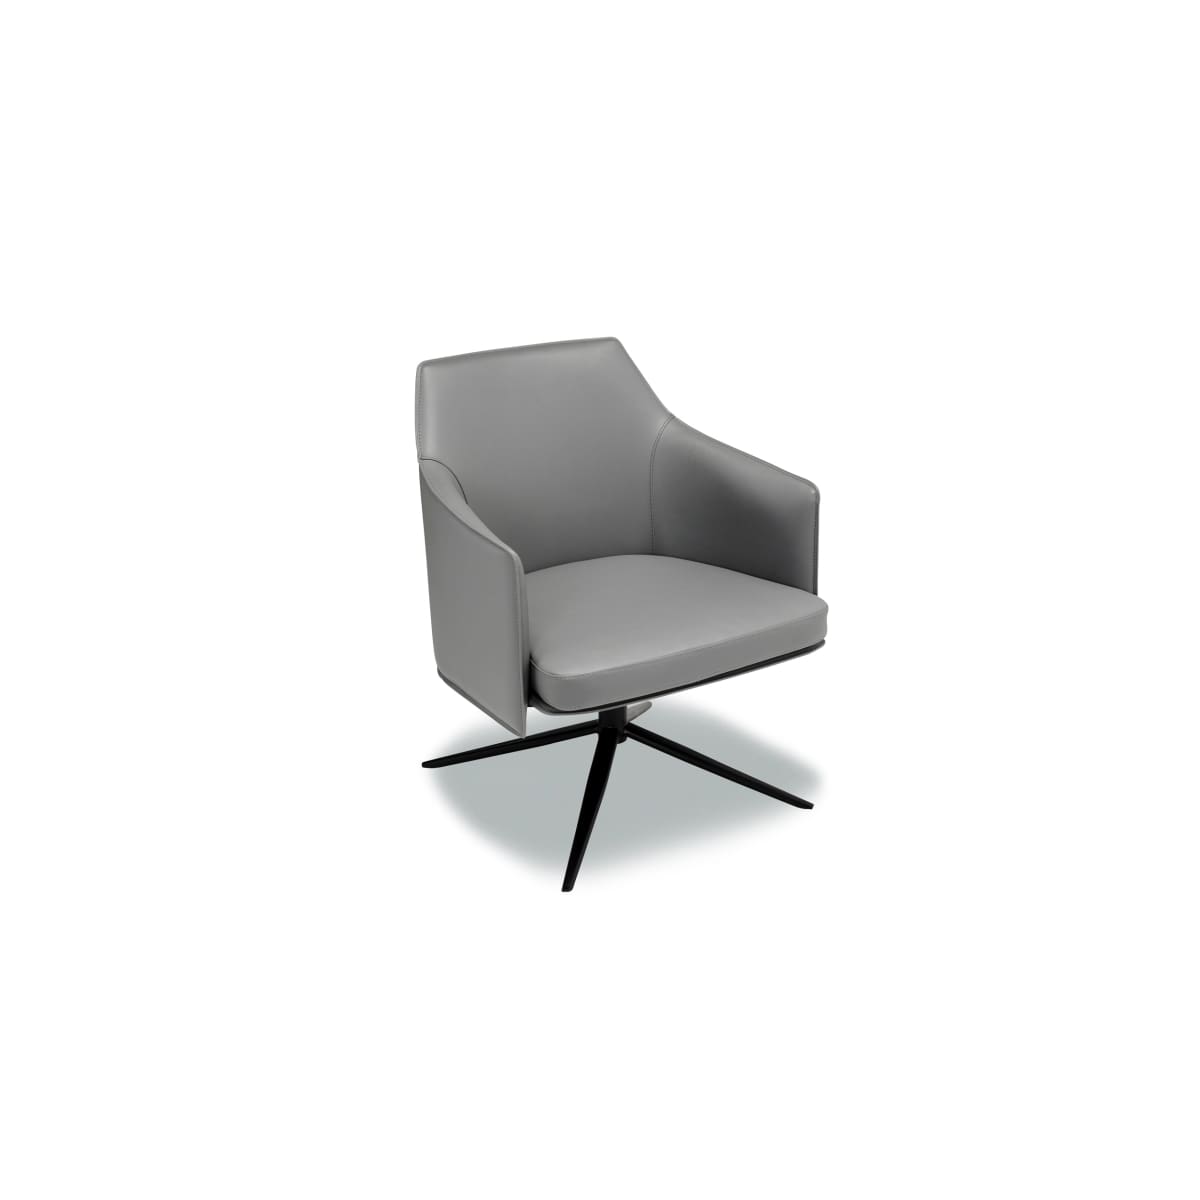 Pivot Swivel Chair. - accent chairs